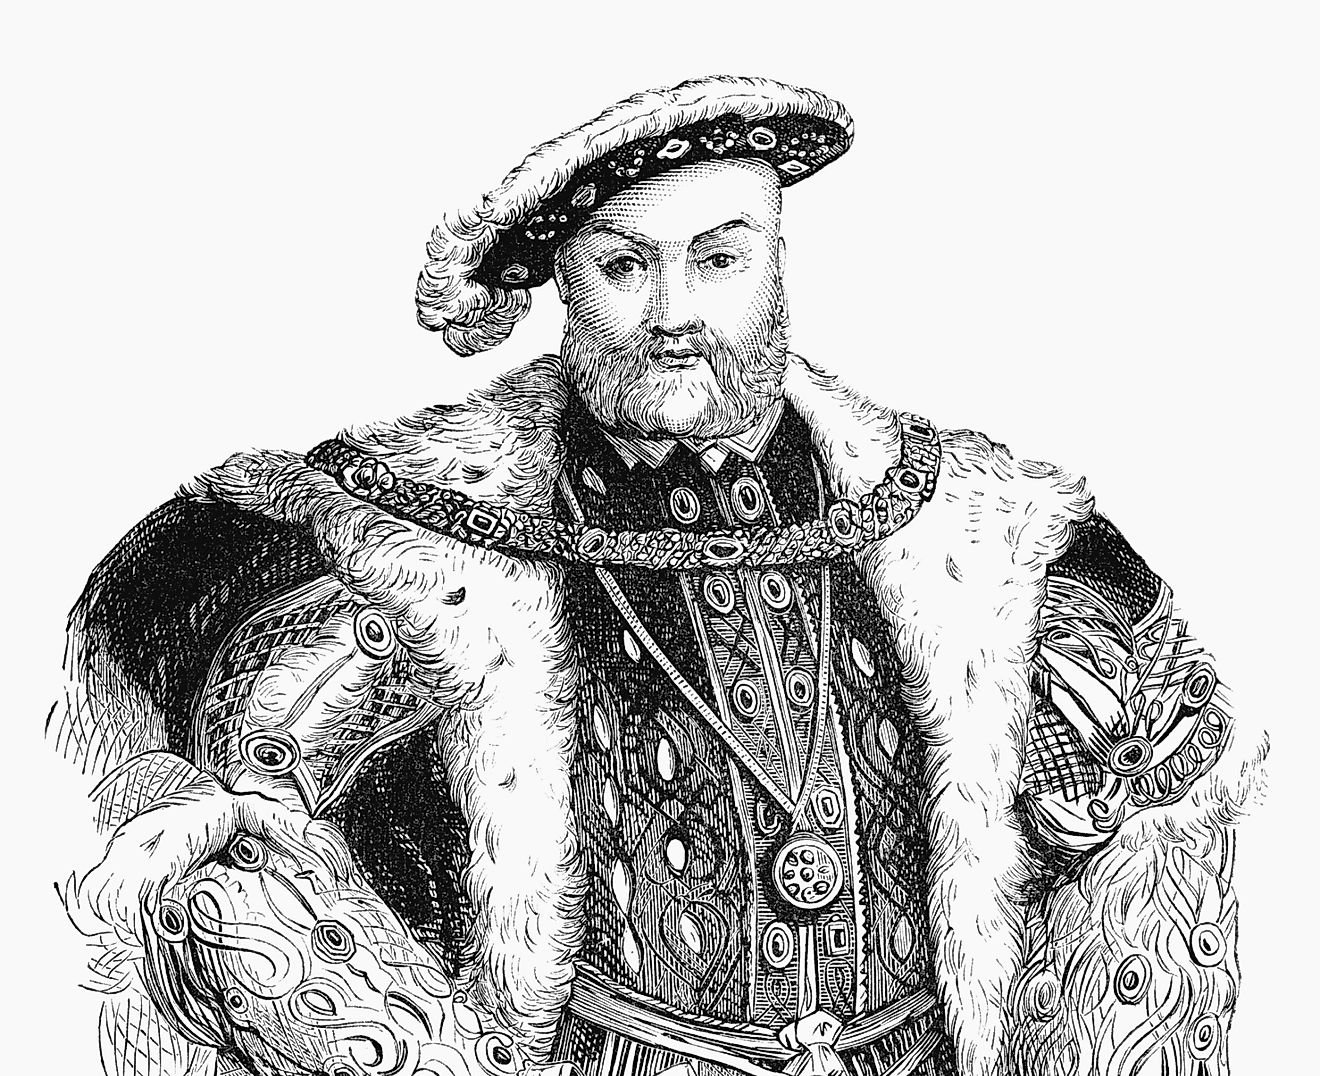 King Henry VIII of England - World Leaders in History